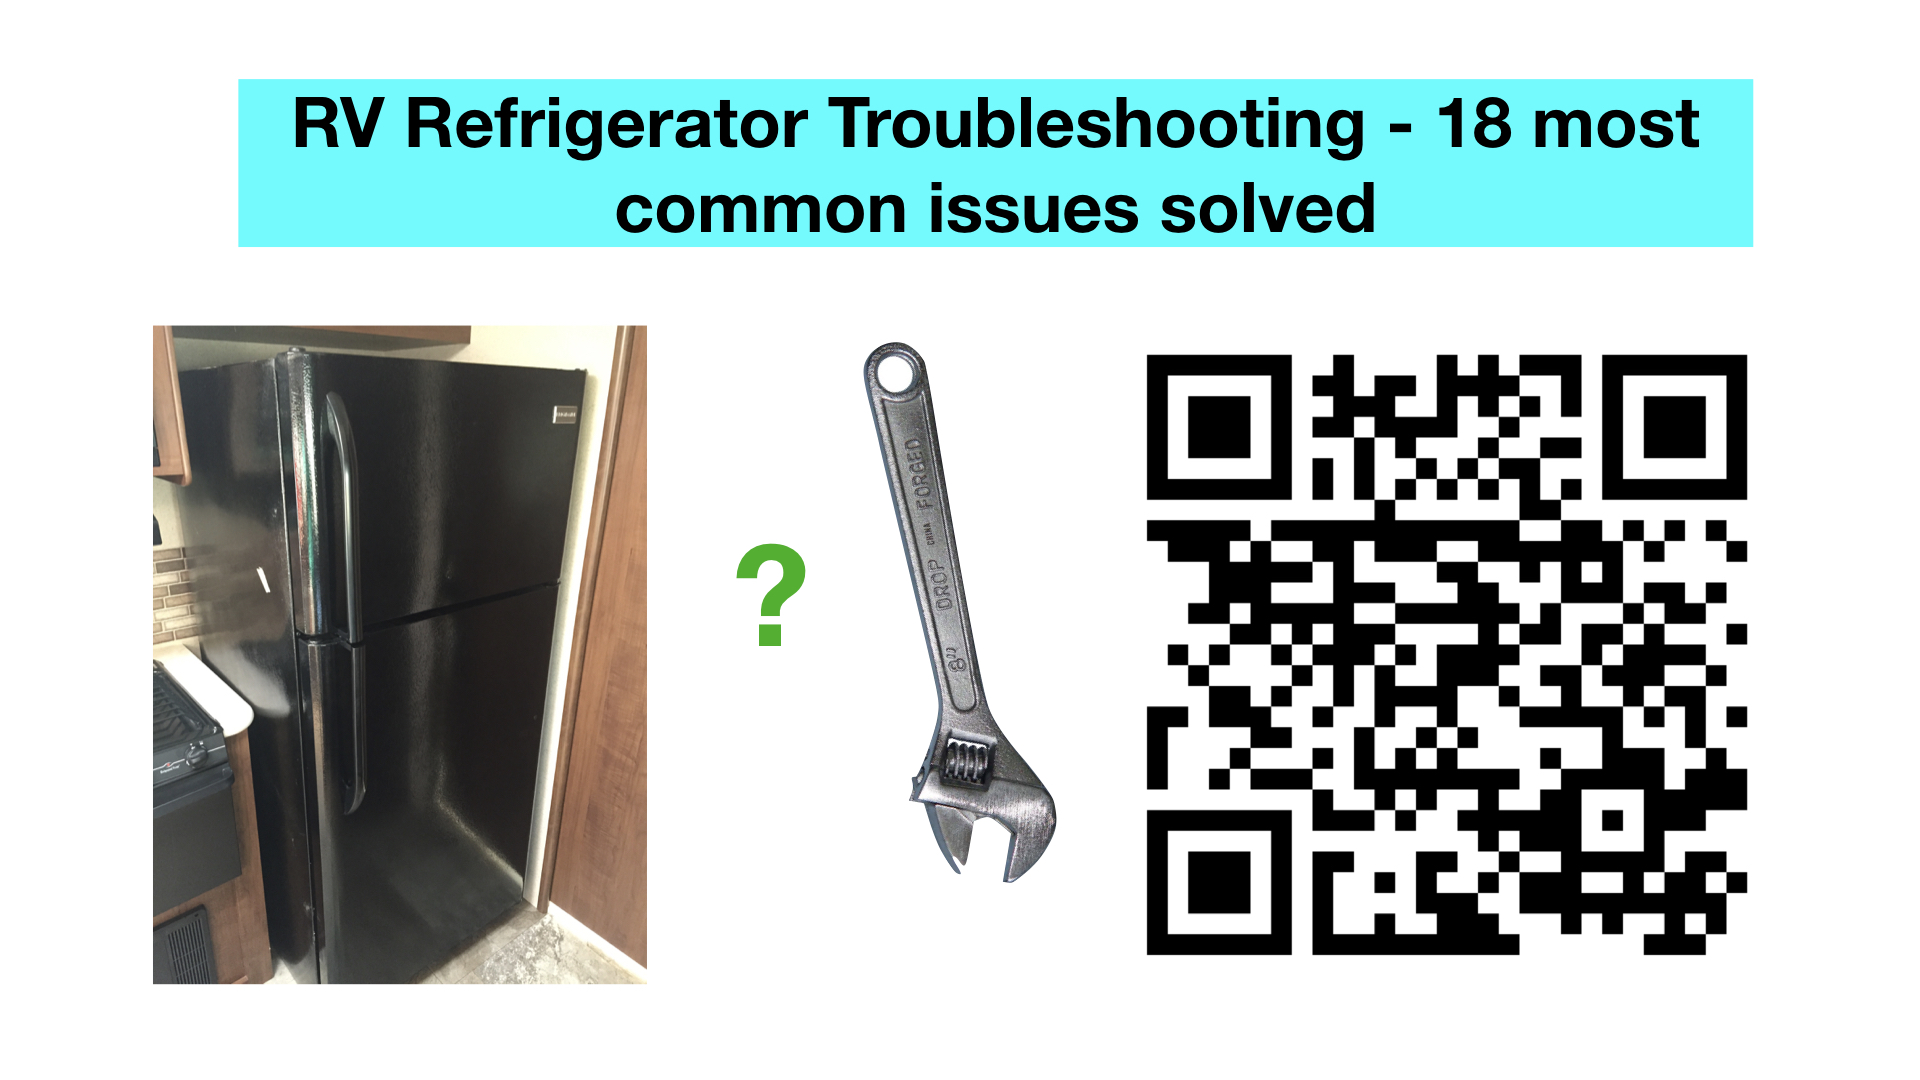 5 Helpful Tips for RV Refrigerator Troubleshooting